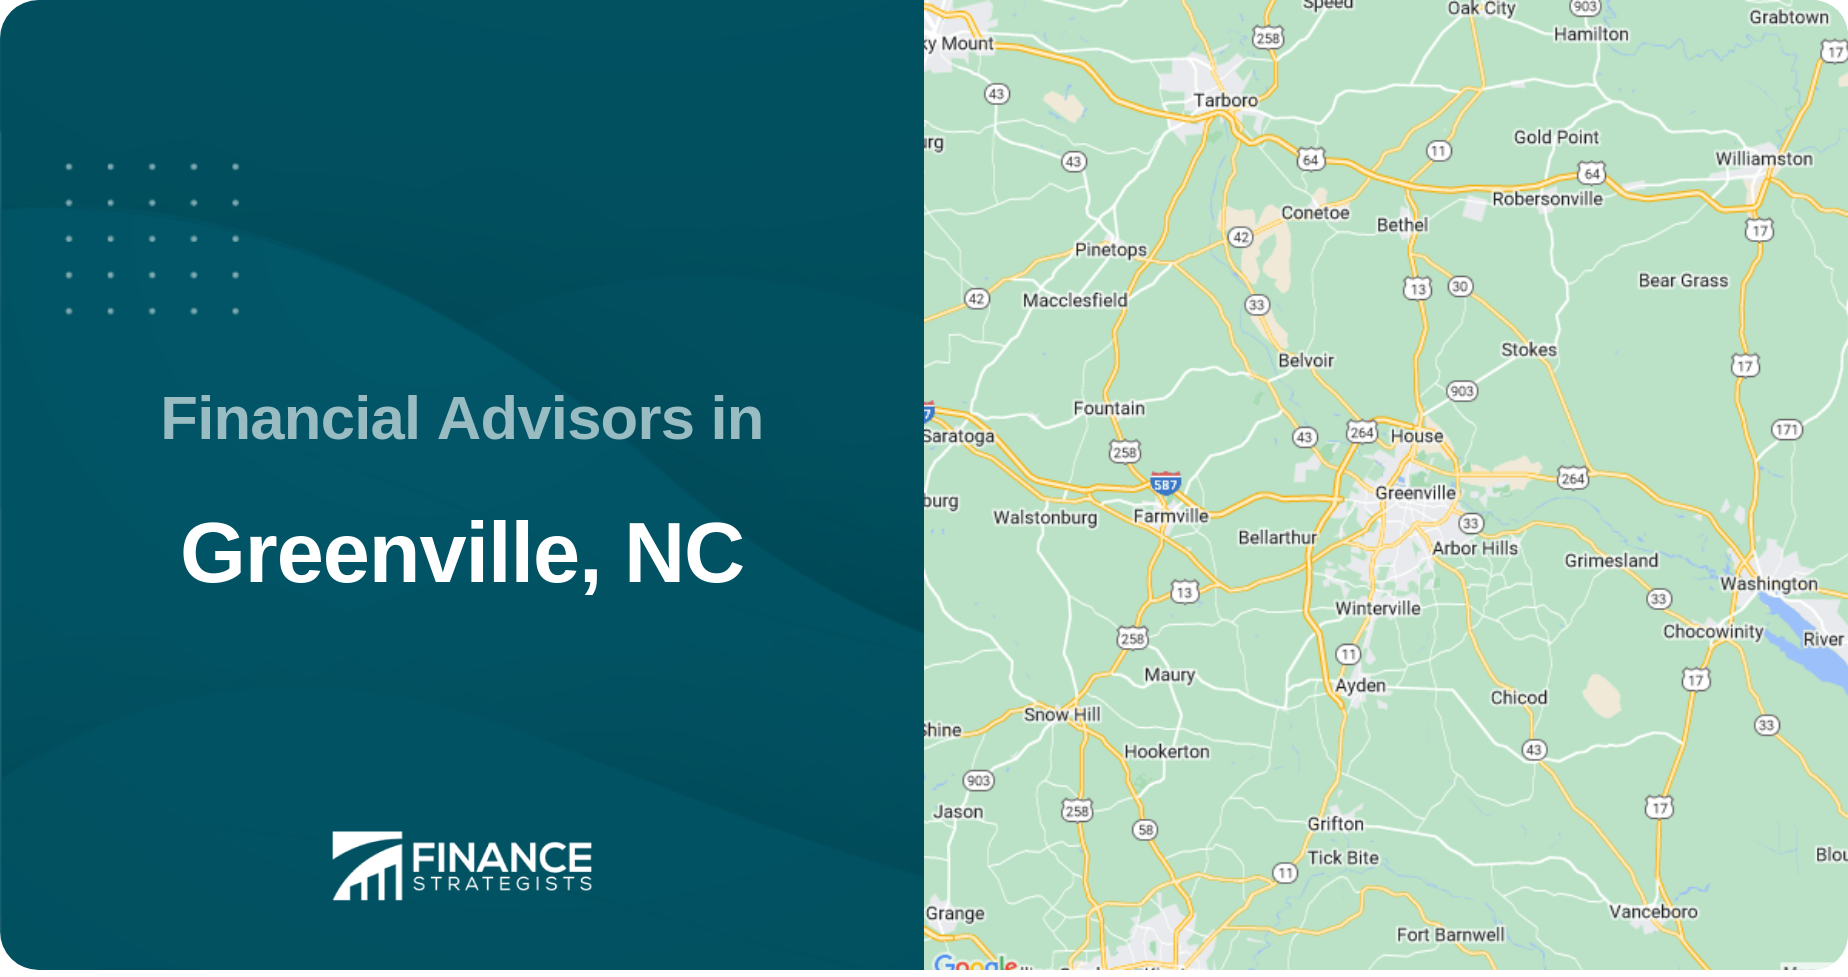 Financial Advisors in Greenville, NC